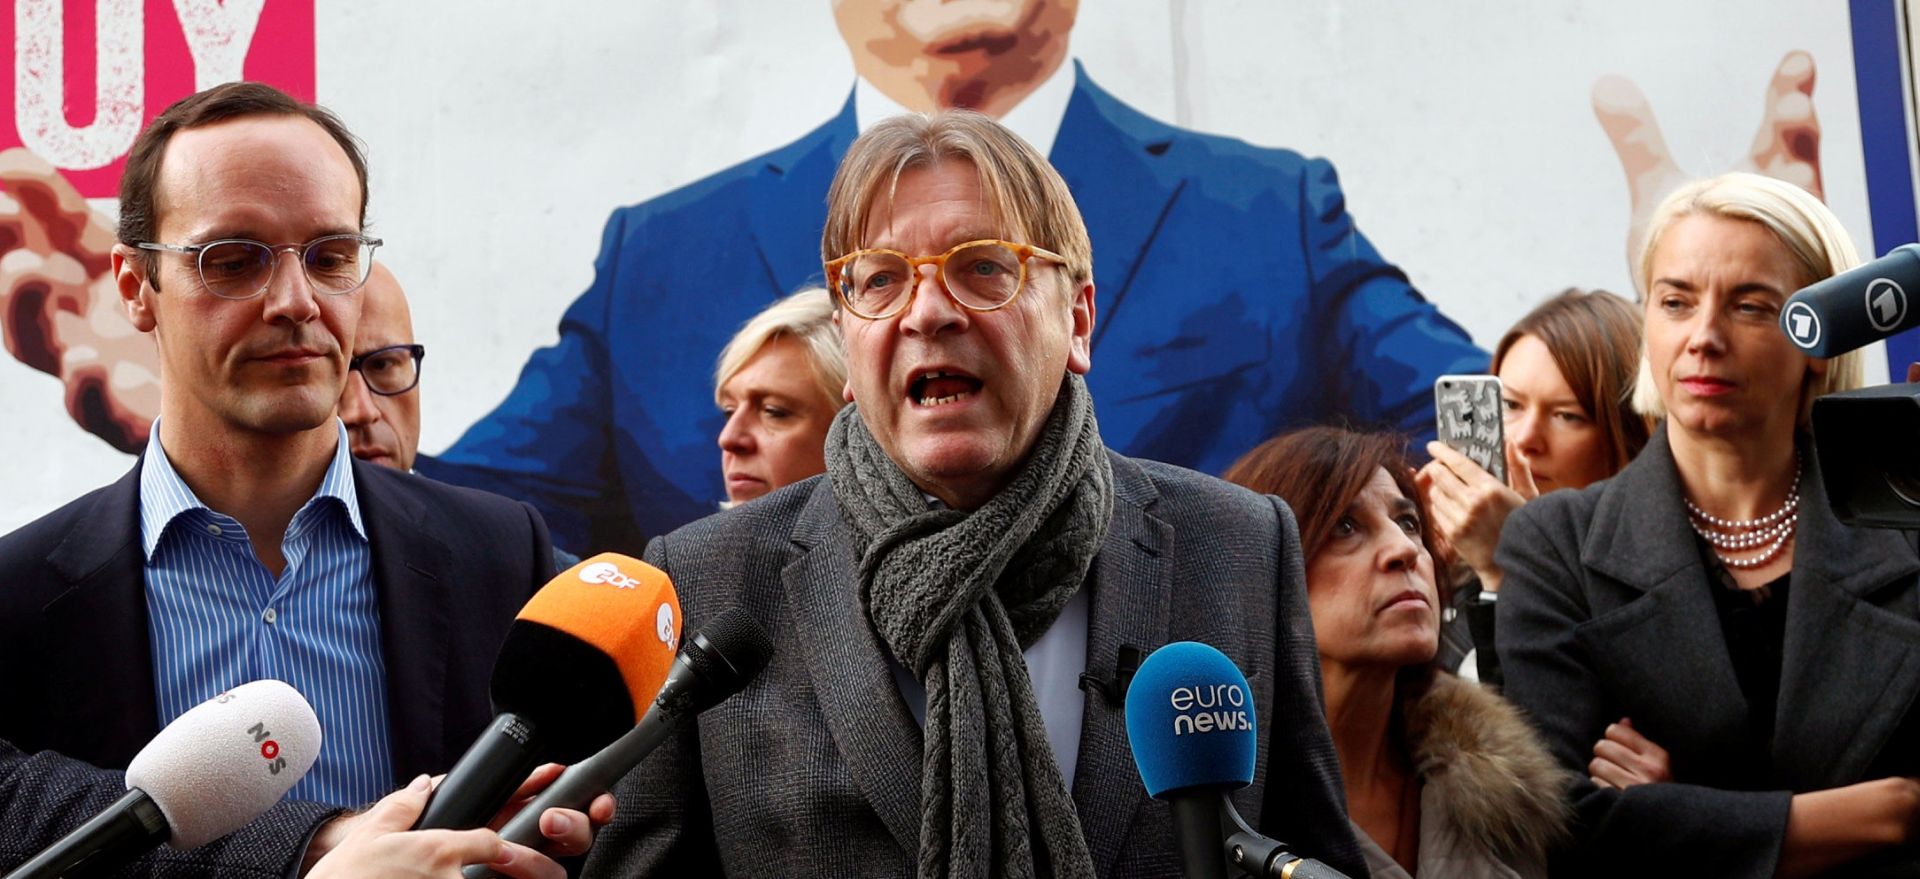 ALDE President Verhofstadt talks in front of an anti-Hungary's PM Orban billboard in Brussels Guy Verhofstadt, President of the Group of the Alliance of Liberals and Democrats for Europe (ALDE), and Marton Benedek of the Hungarian opposition party Momentum brief the media in front of a billboard truck showing a picture of Hungary's Prime Minister Viktor Orban outside the European Parliament in Brussels, Belgium November 6, 2018.   REUTERS/Francois Lenoir FRANCOIS LENOIR